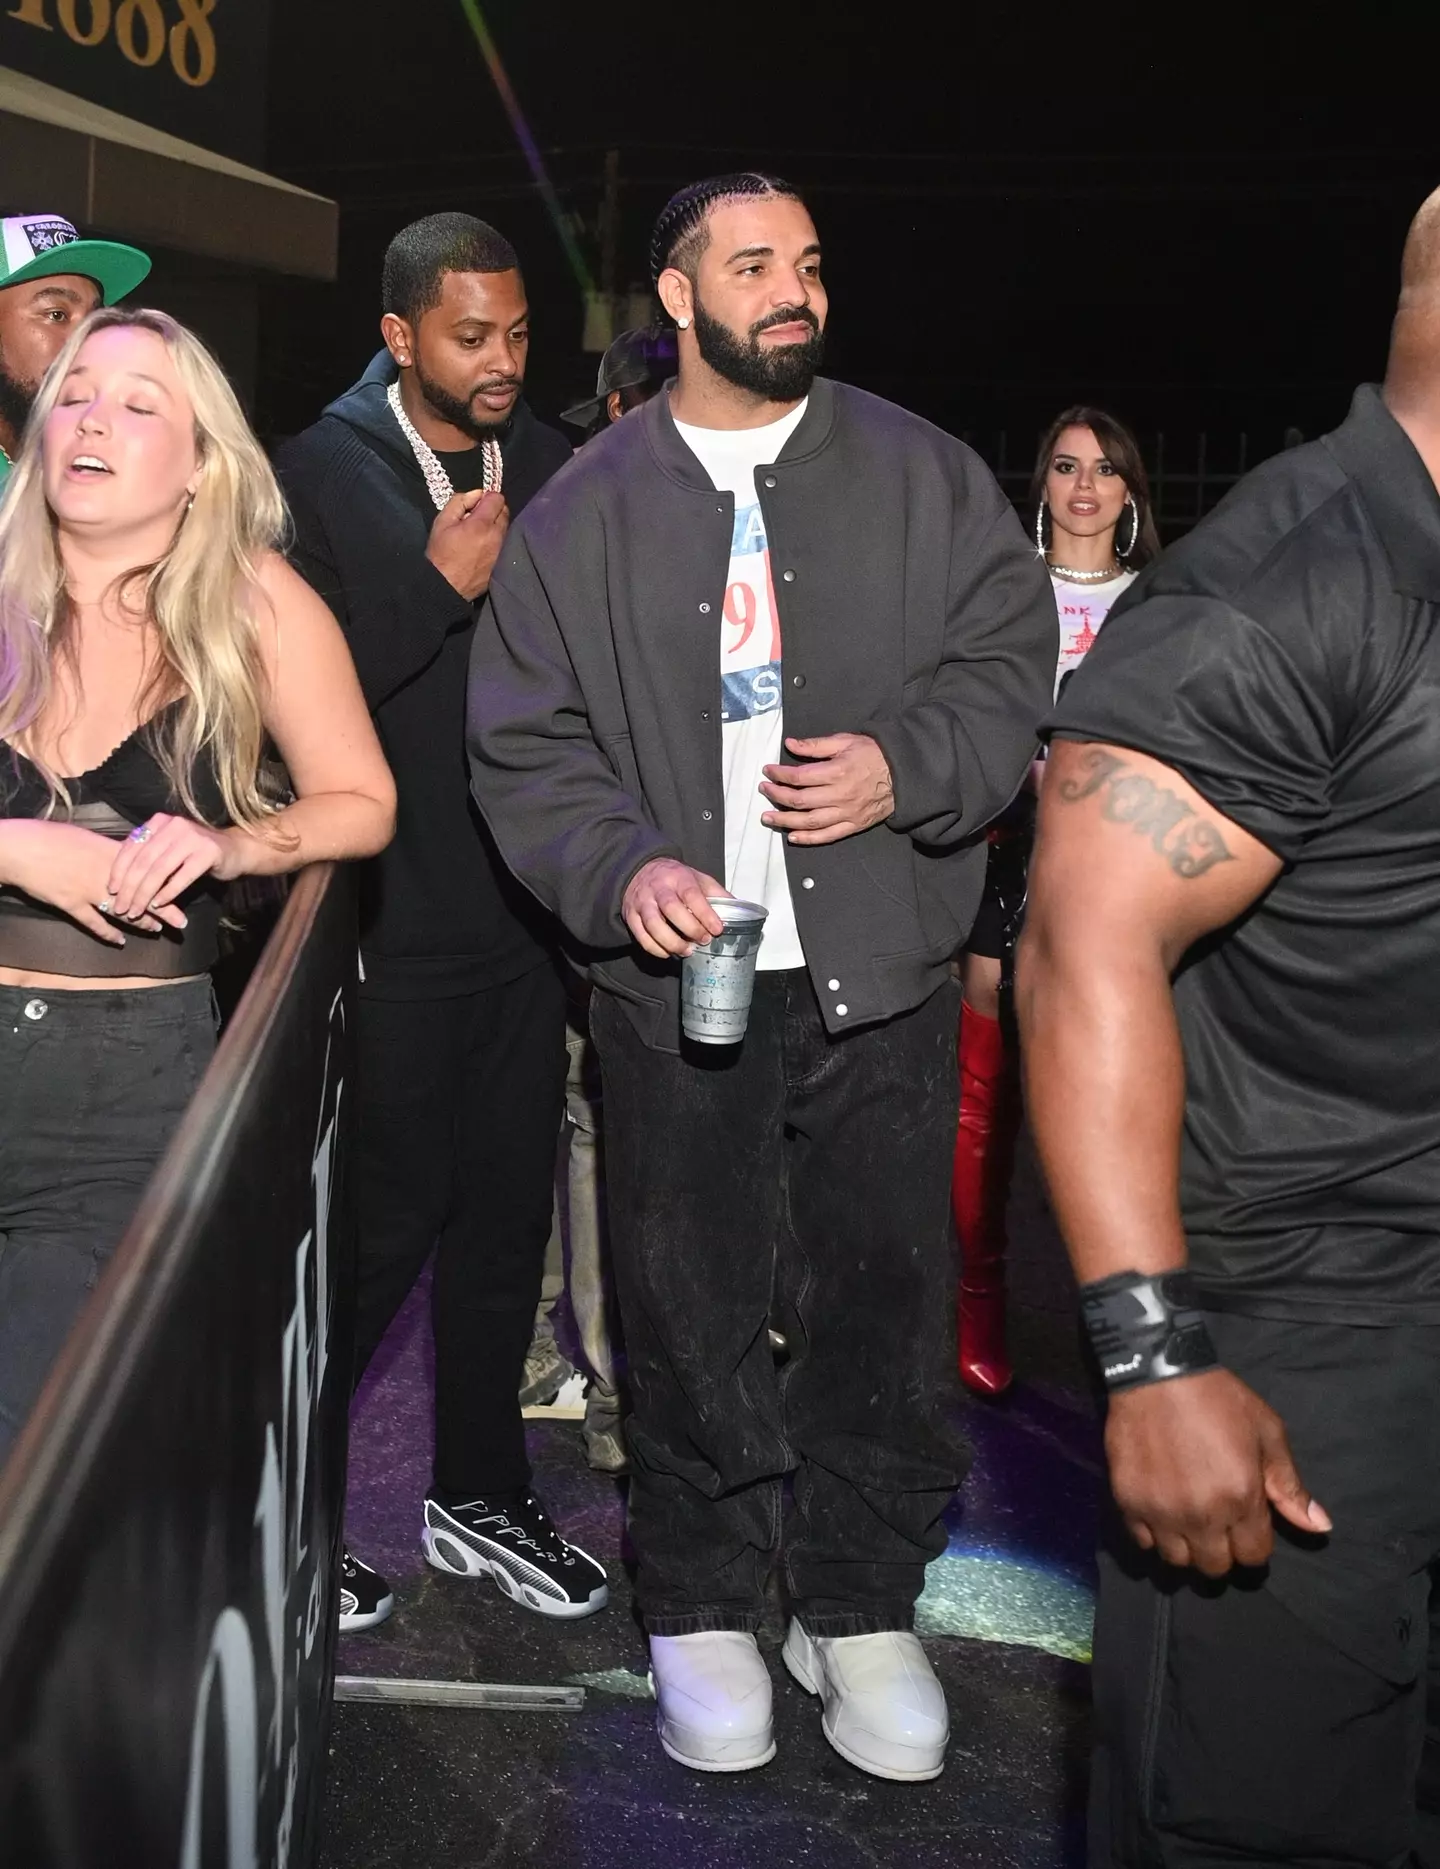 Drake had been attending a concert after party at Onyx nightclub.